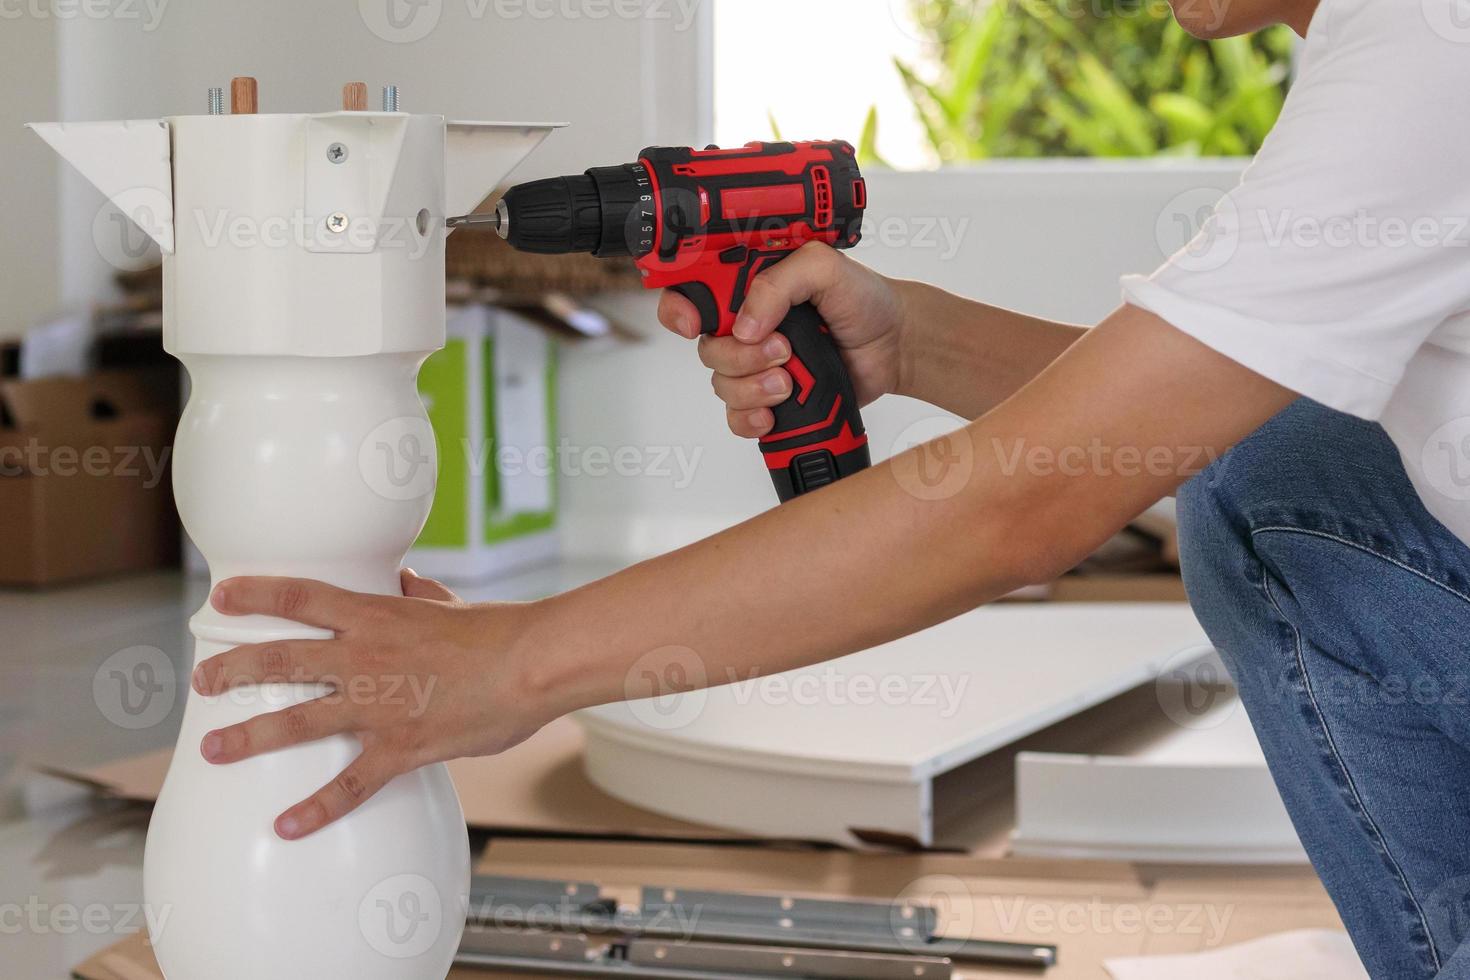 man assembling white table furniture at home using cordless screwdriver photo